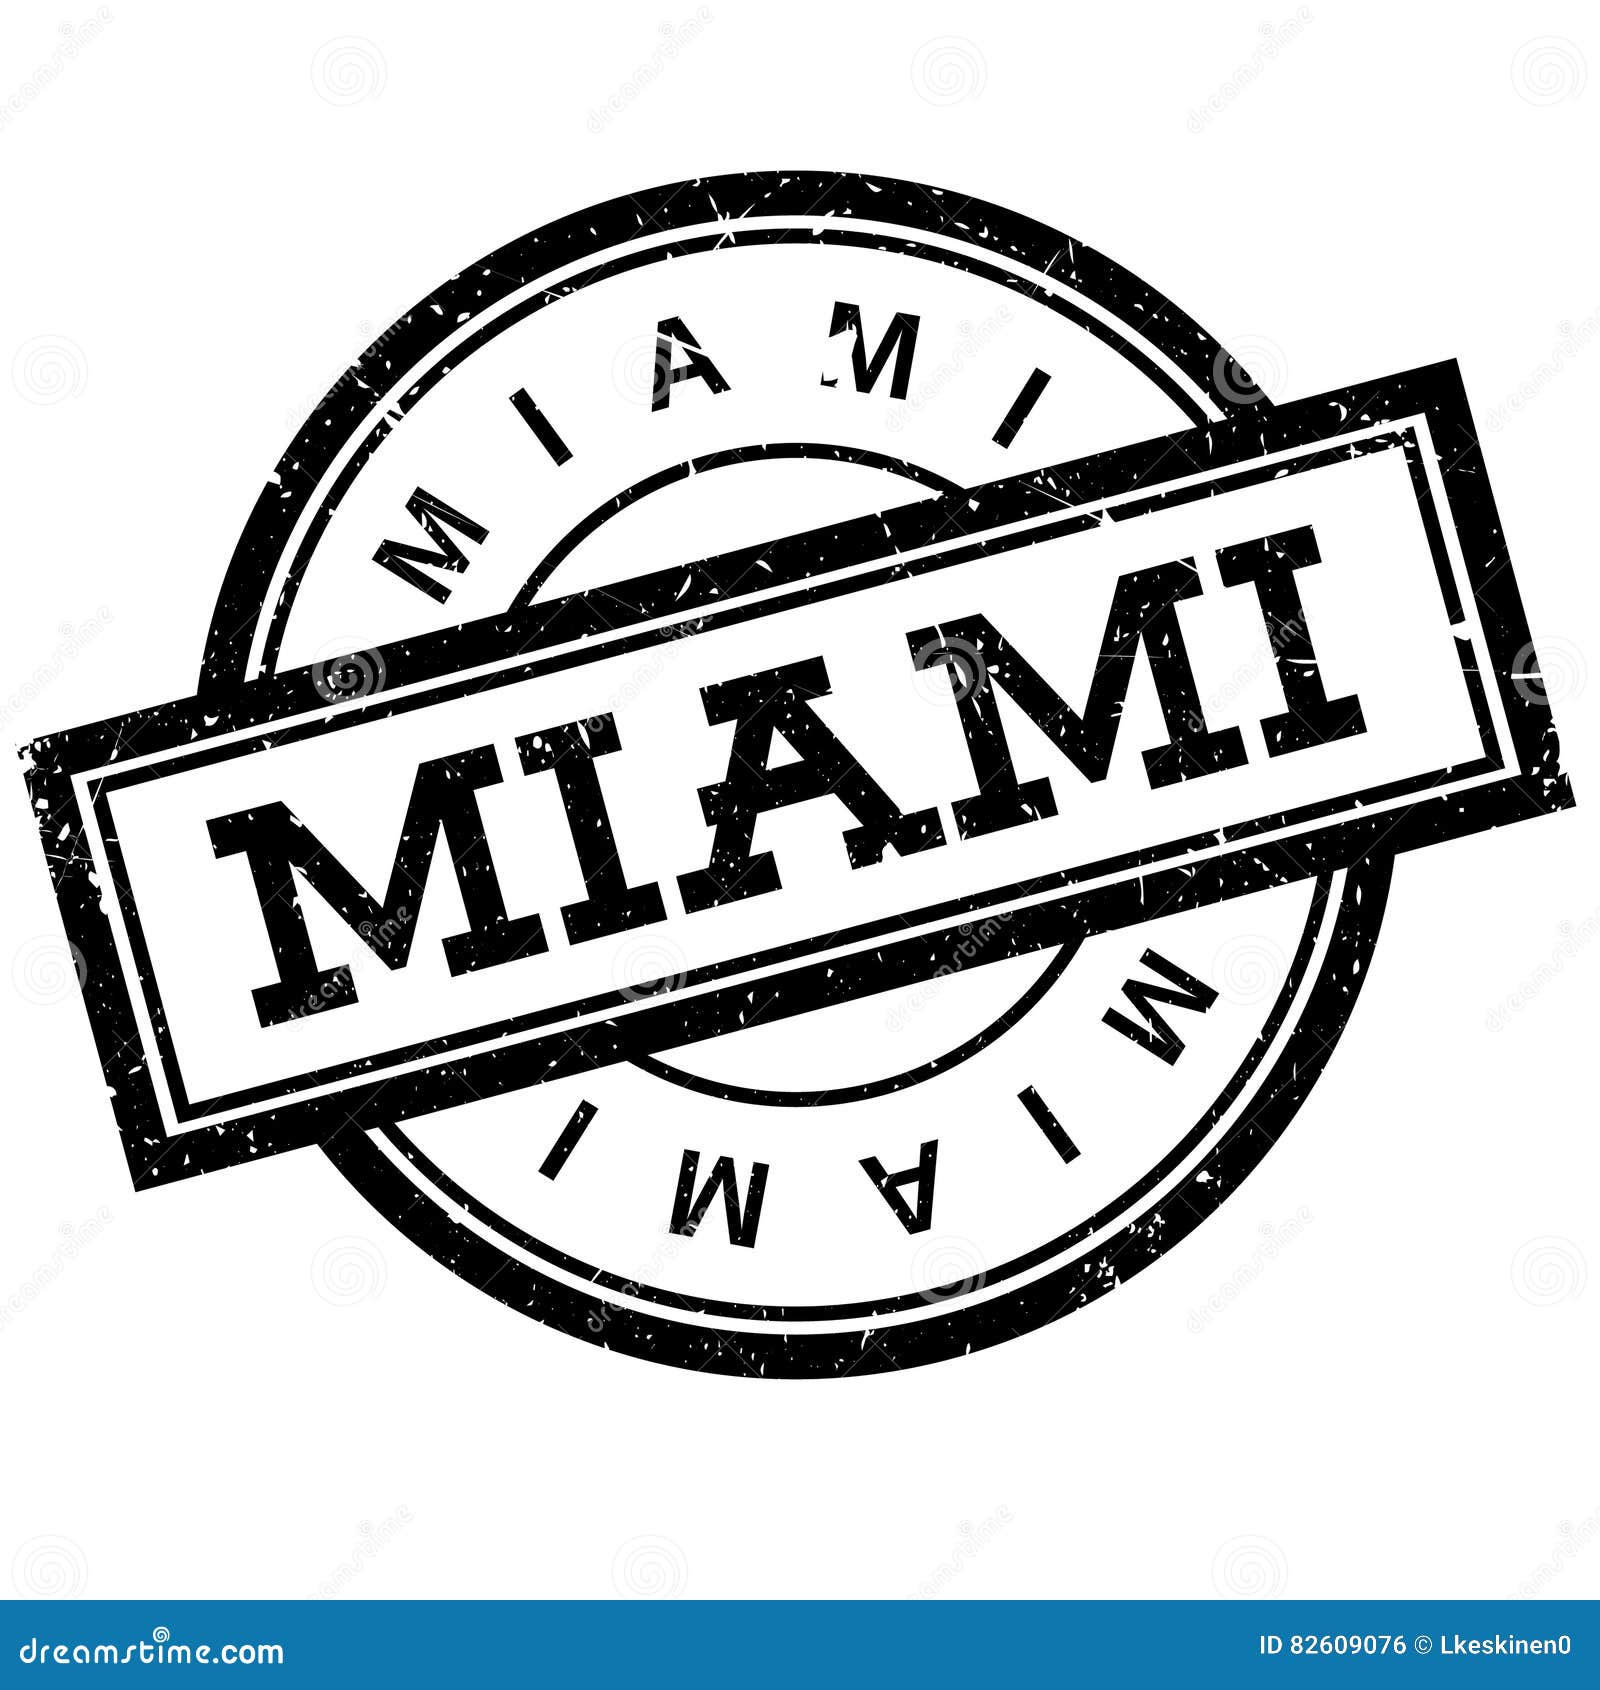 Miami rubber stamp stock vector. Illustration of states - 82609076